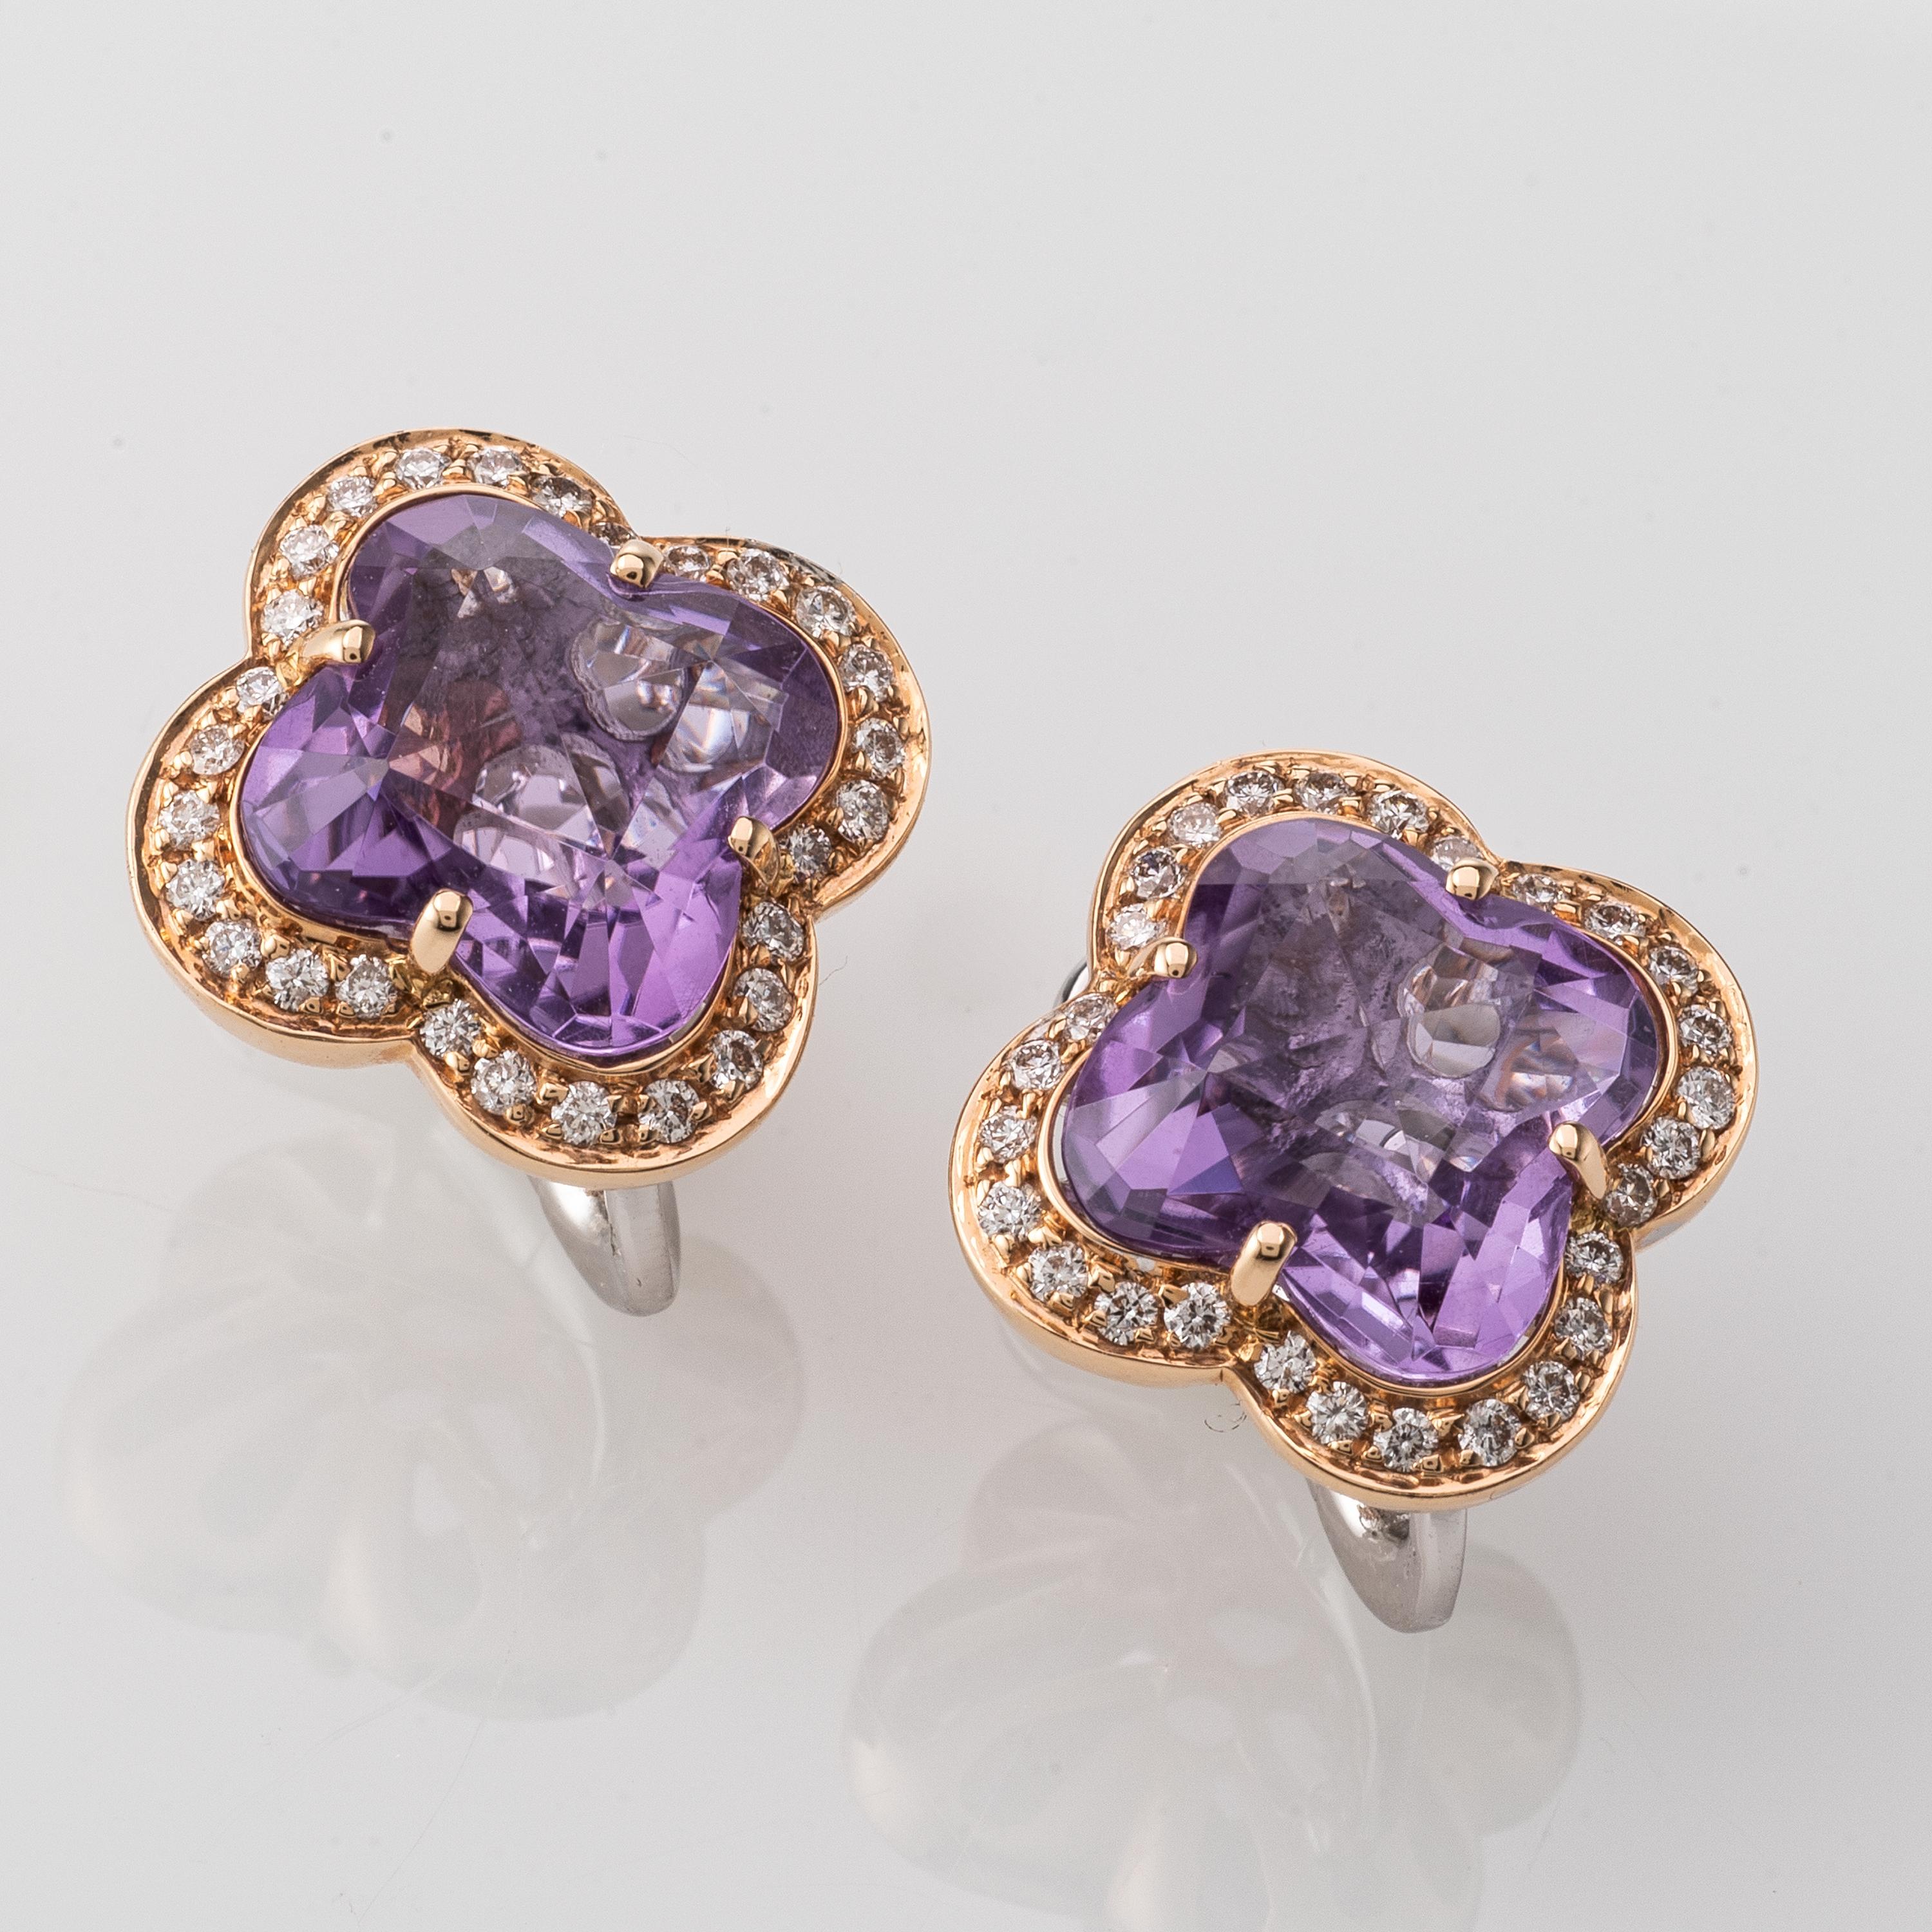 These stunning Earrings feature fancy cut Amethysts and Diamonds set in 18 Karat Rose Gold.
7.5 Carat of Amethysts and 0.42 Carat of Diamonds.
